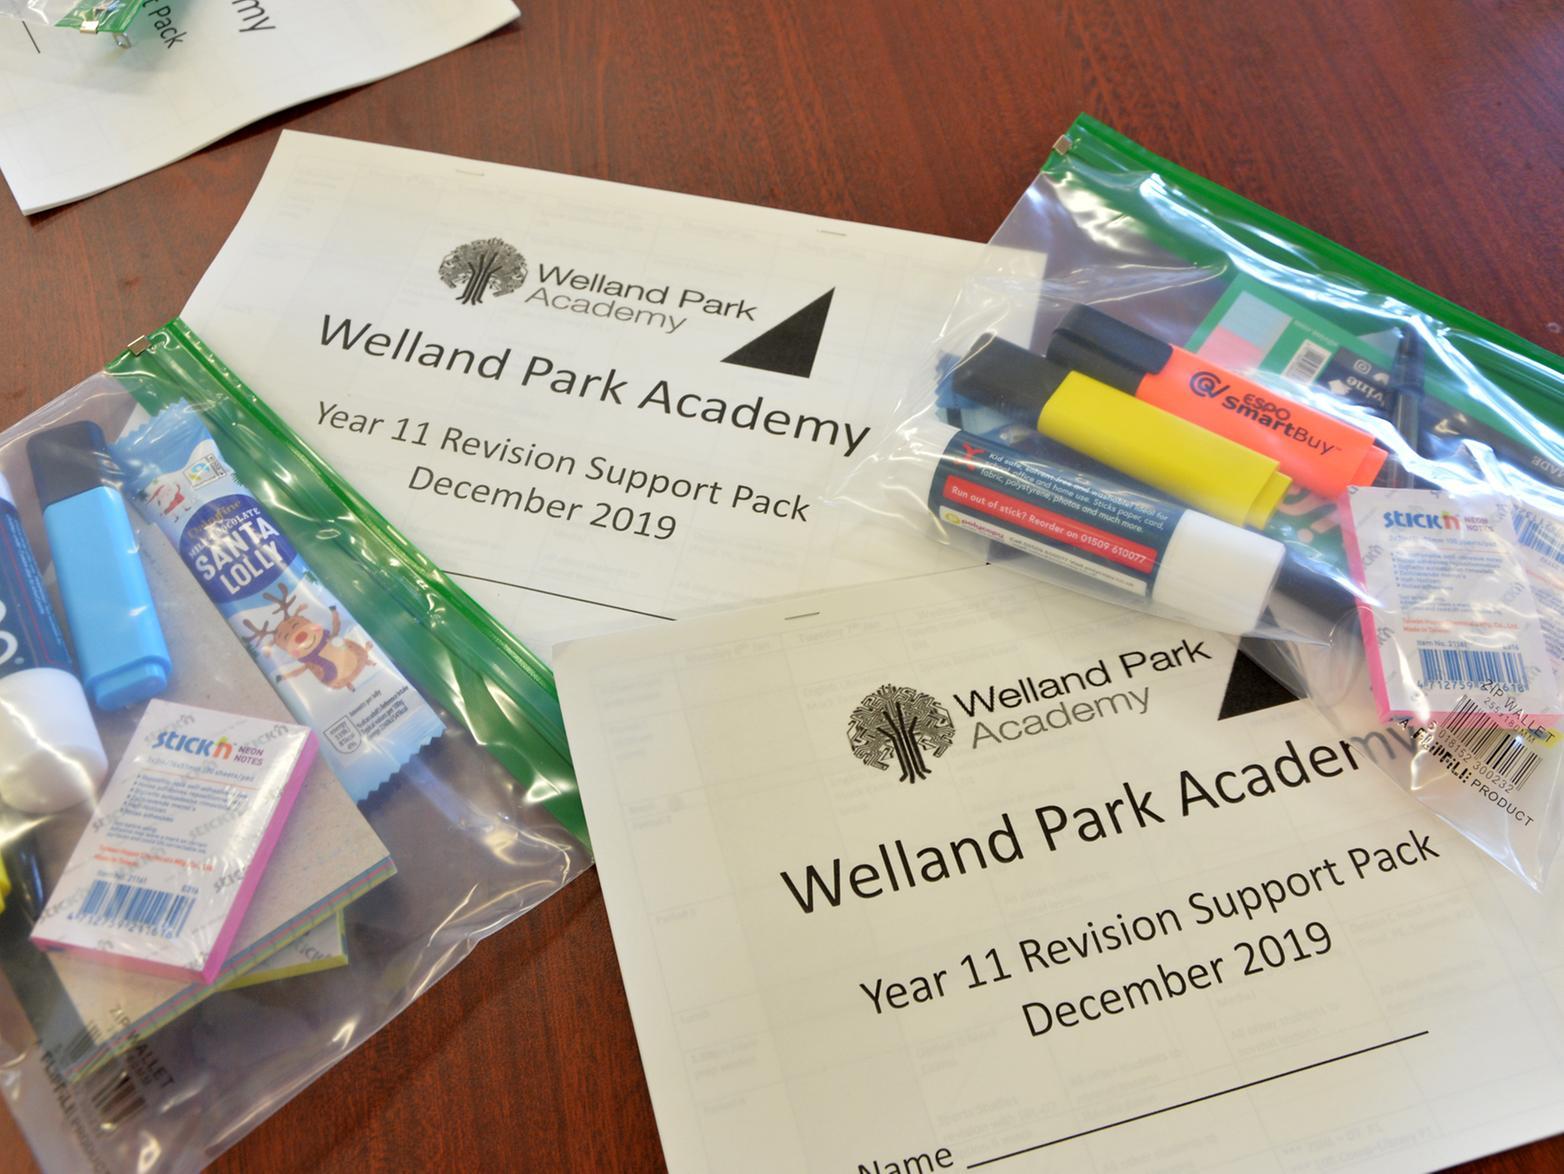 Welland Park Academy revision support pack.